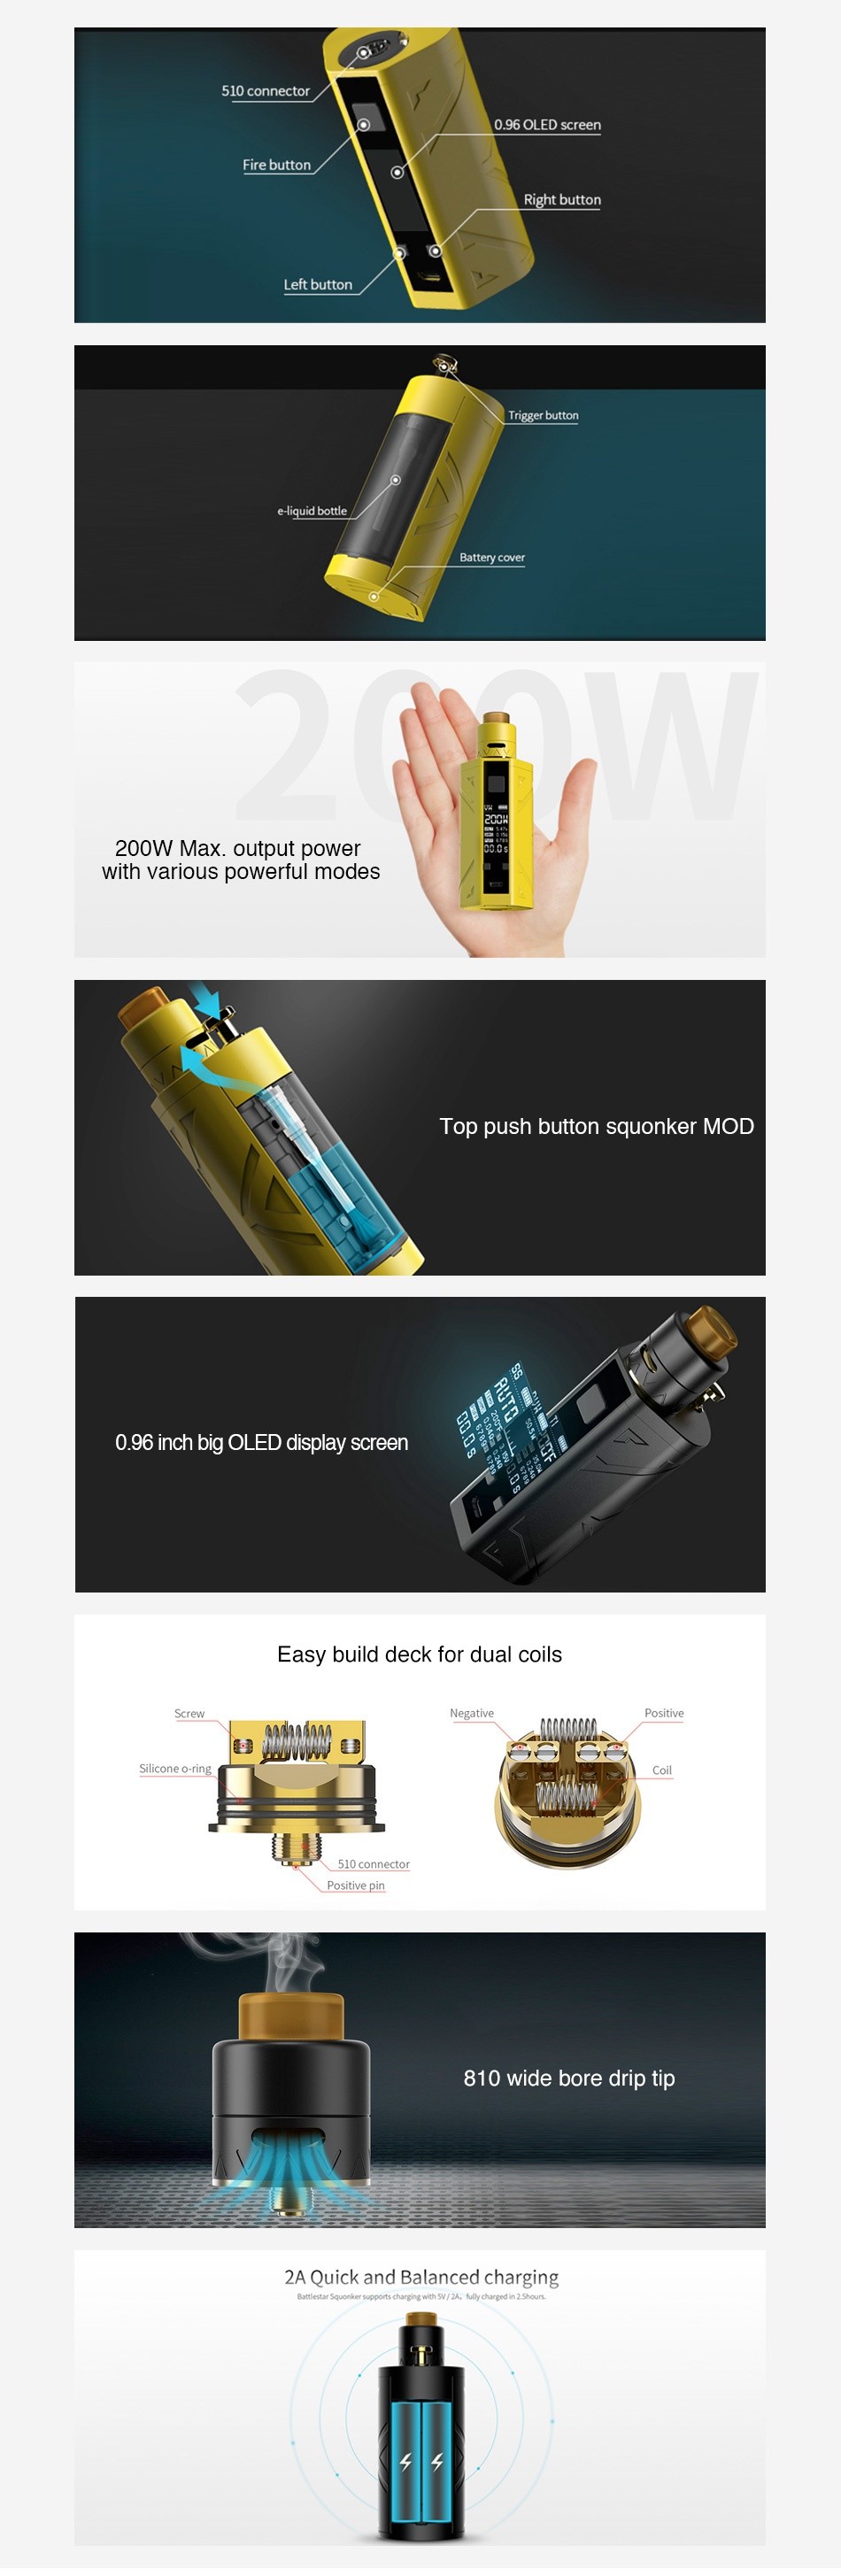 Smoant Battlestar 200W TC Squonker Kit D96 OLED screen Left button  ooW Max output power with various powerful modes Top push button squonker MOD 0 96 inch big OLED display screen Easy build deck for dual coils Positi d34S48A 510cornpctnr 810 wide bore drip tip 2A Quick and Balanced charging